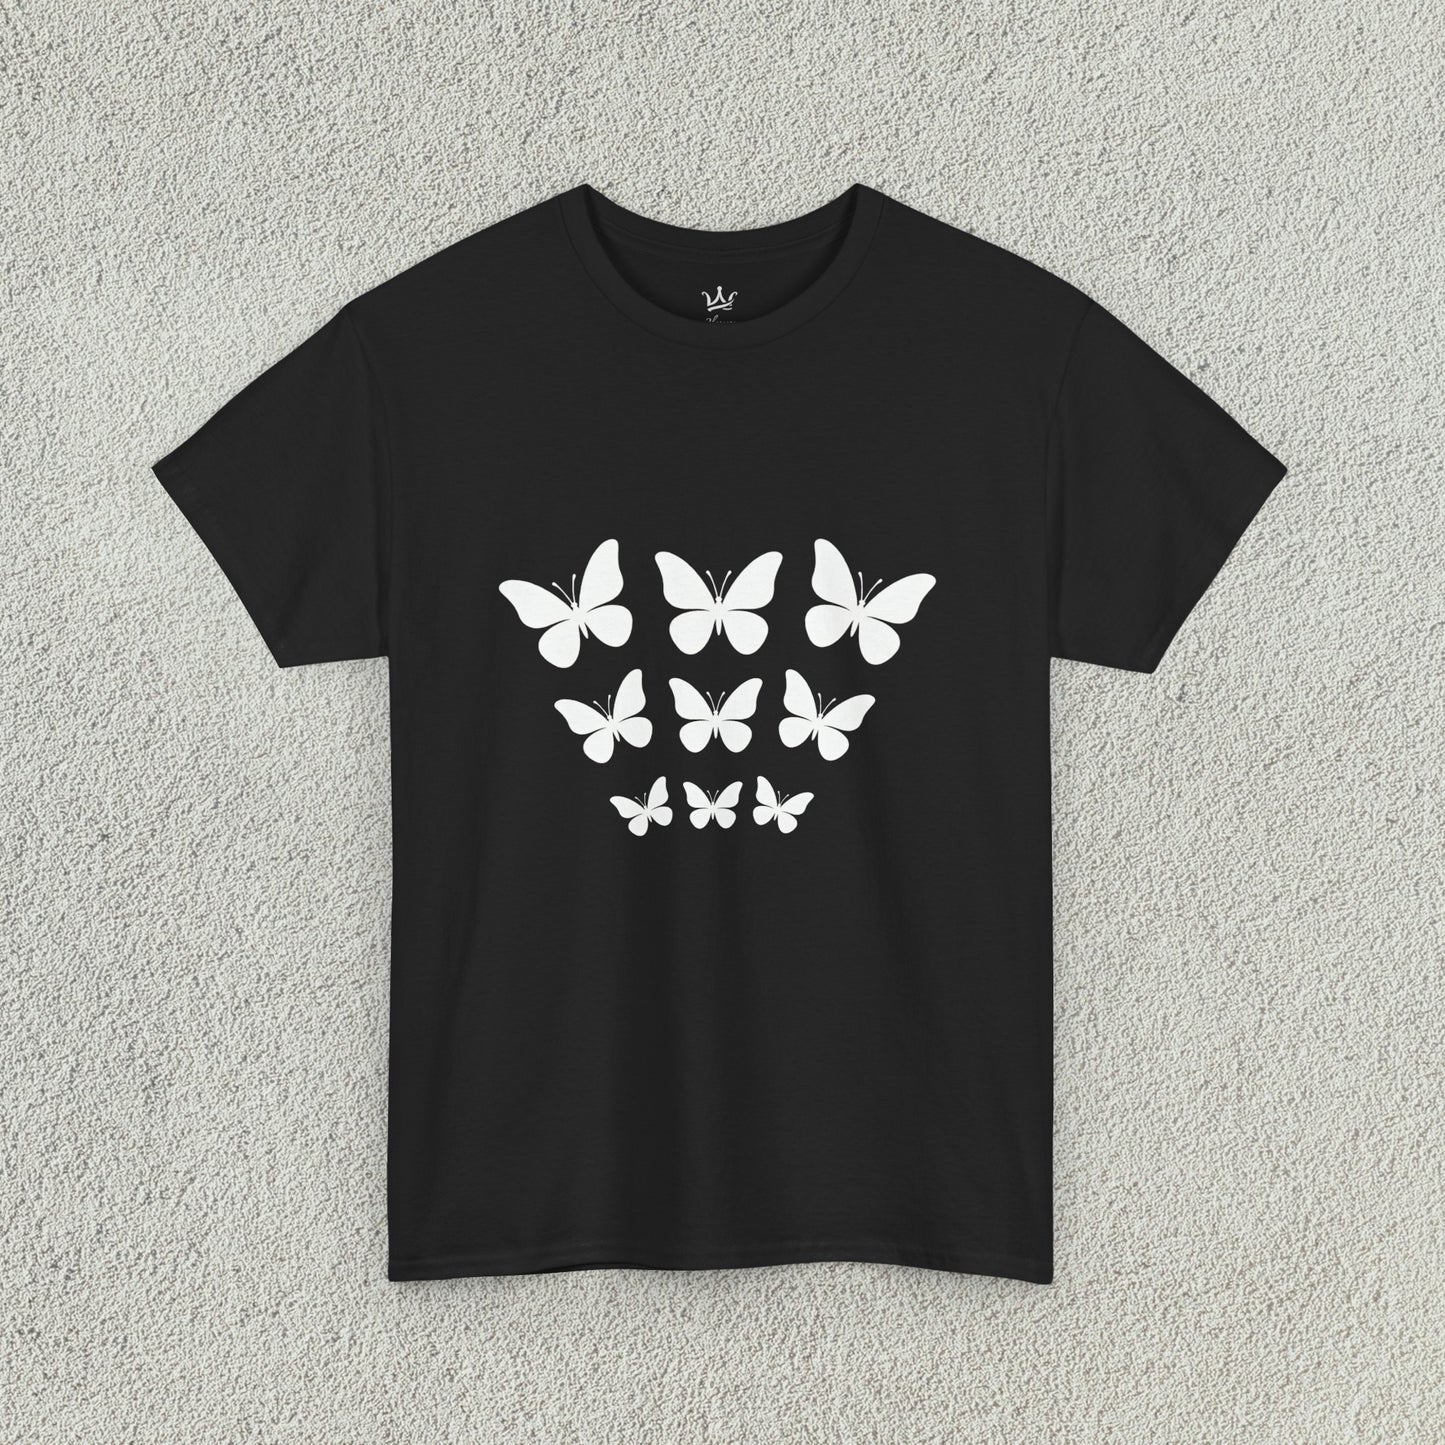 Classic Cotton Tee Butterfly Effect